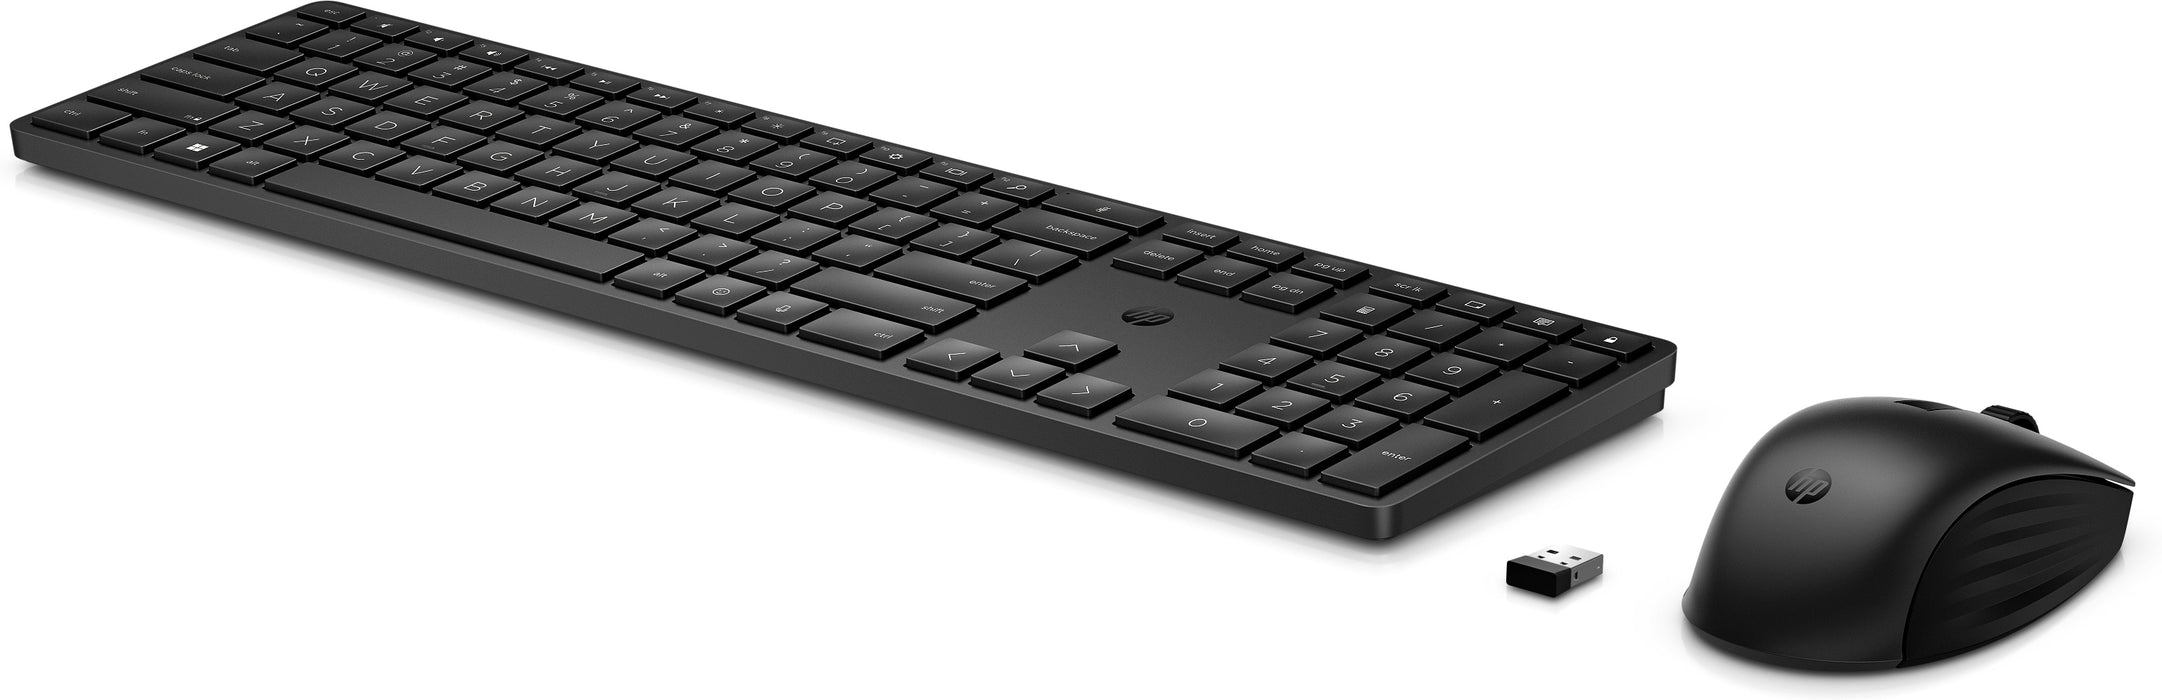 HP 655 Wireless Keyboard and Mouse Combo, Full-size (100%), RF Wireless, Membrane, Black, Mouse included